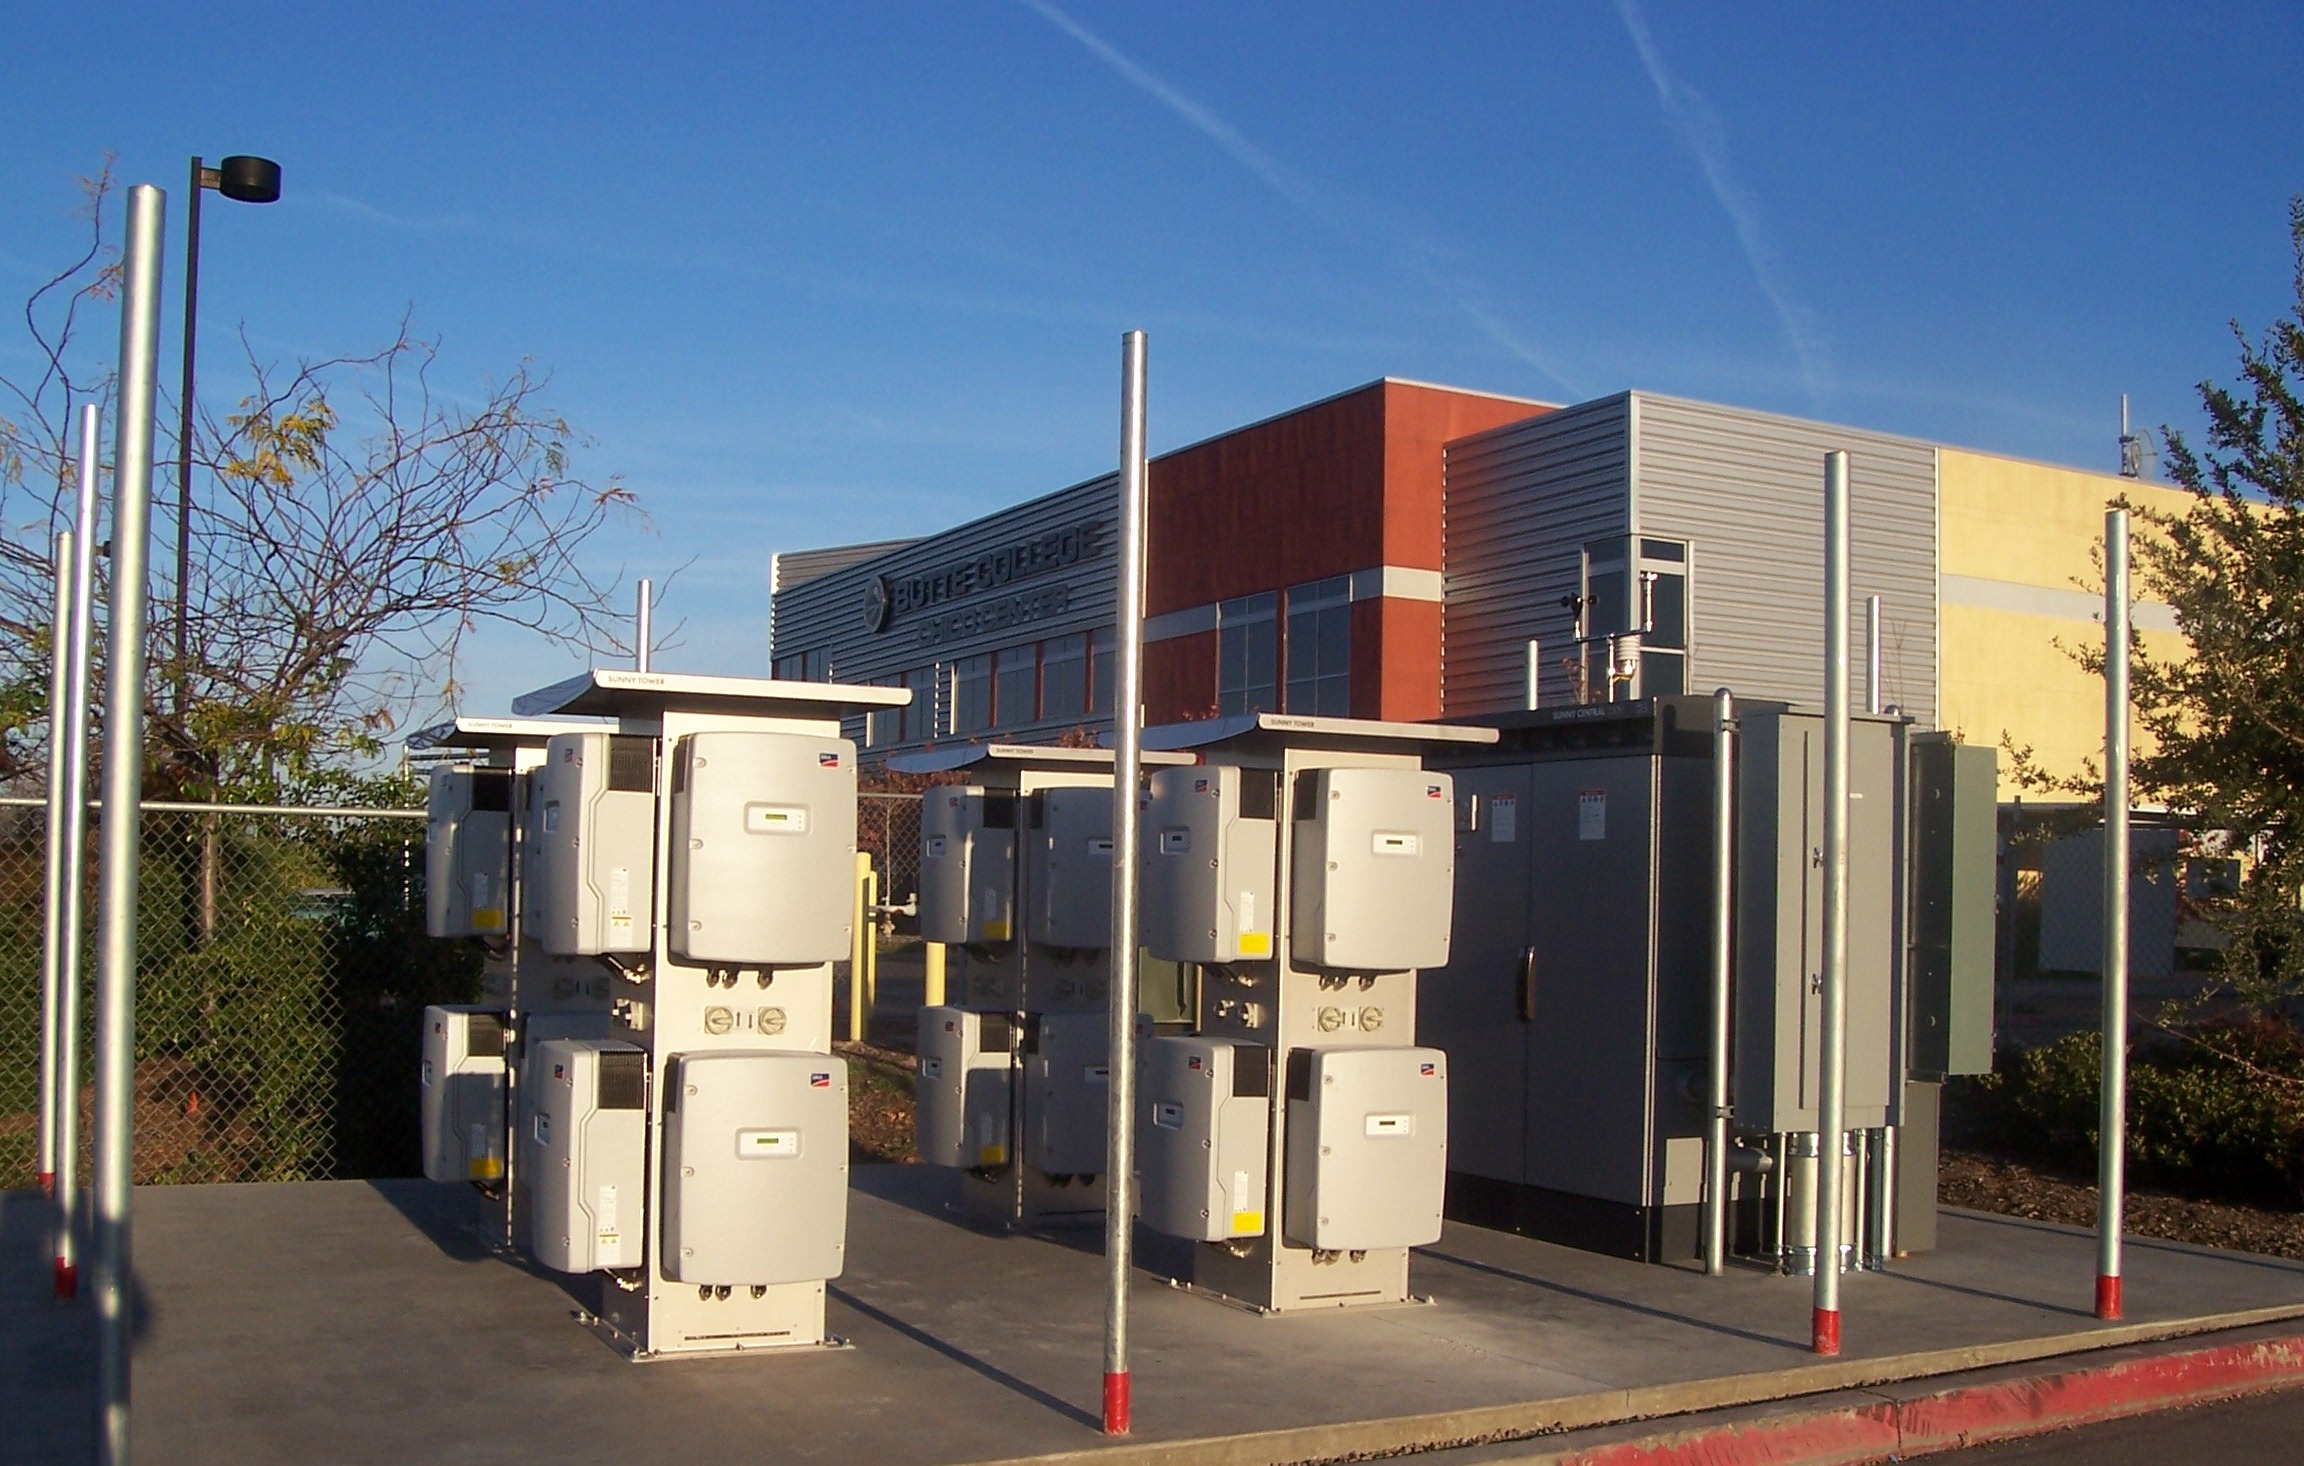 Mid-construction, inverters await fencing to enclose them from passing students.